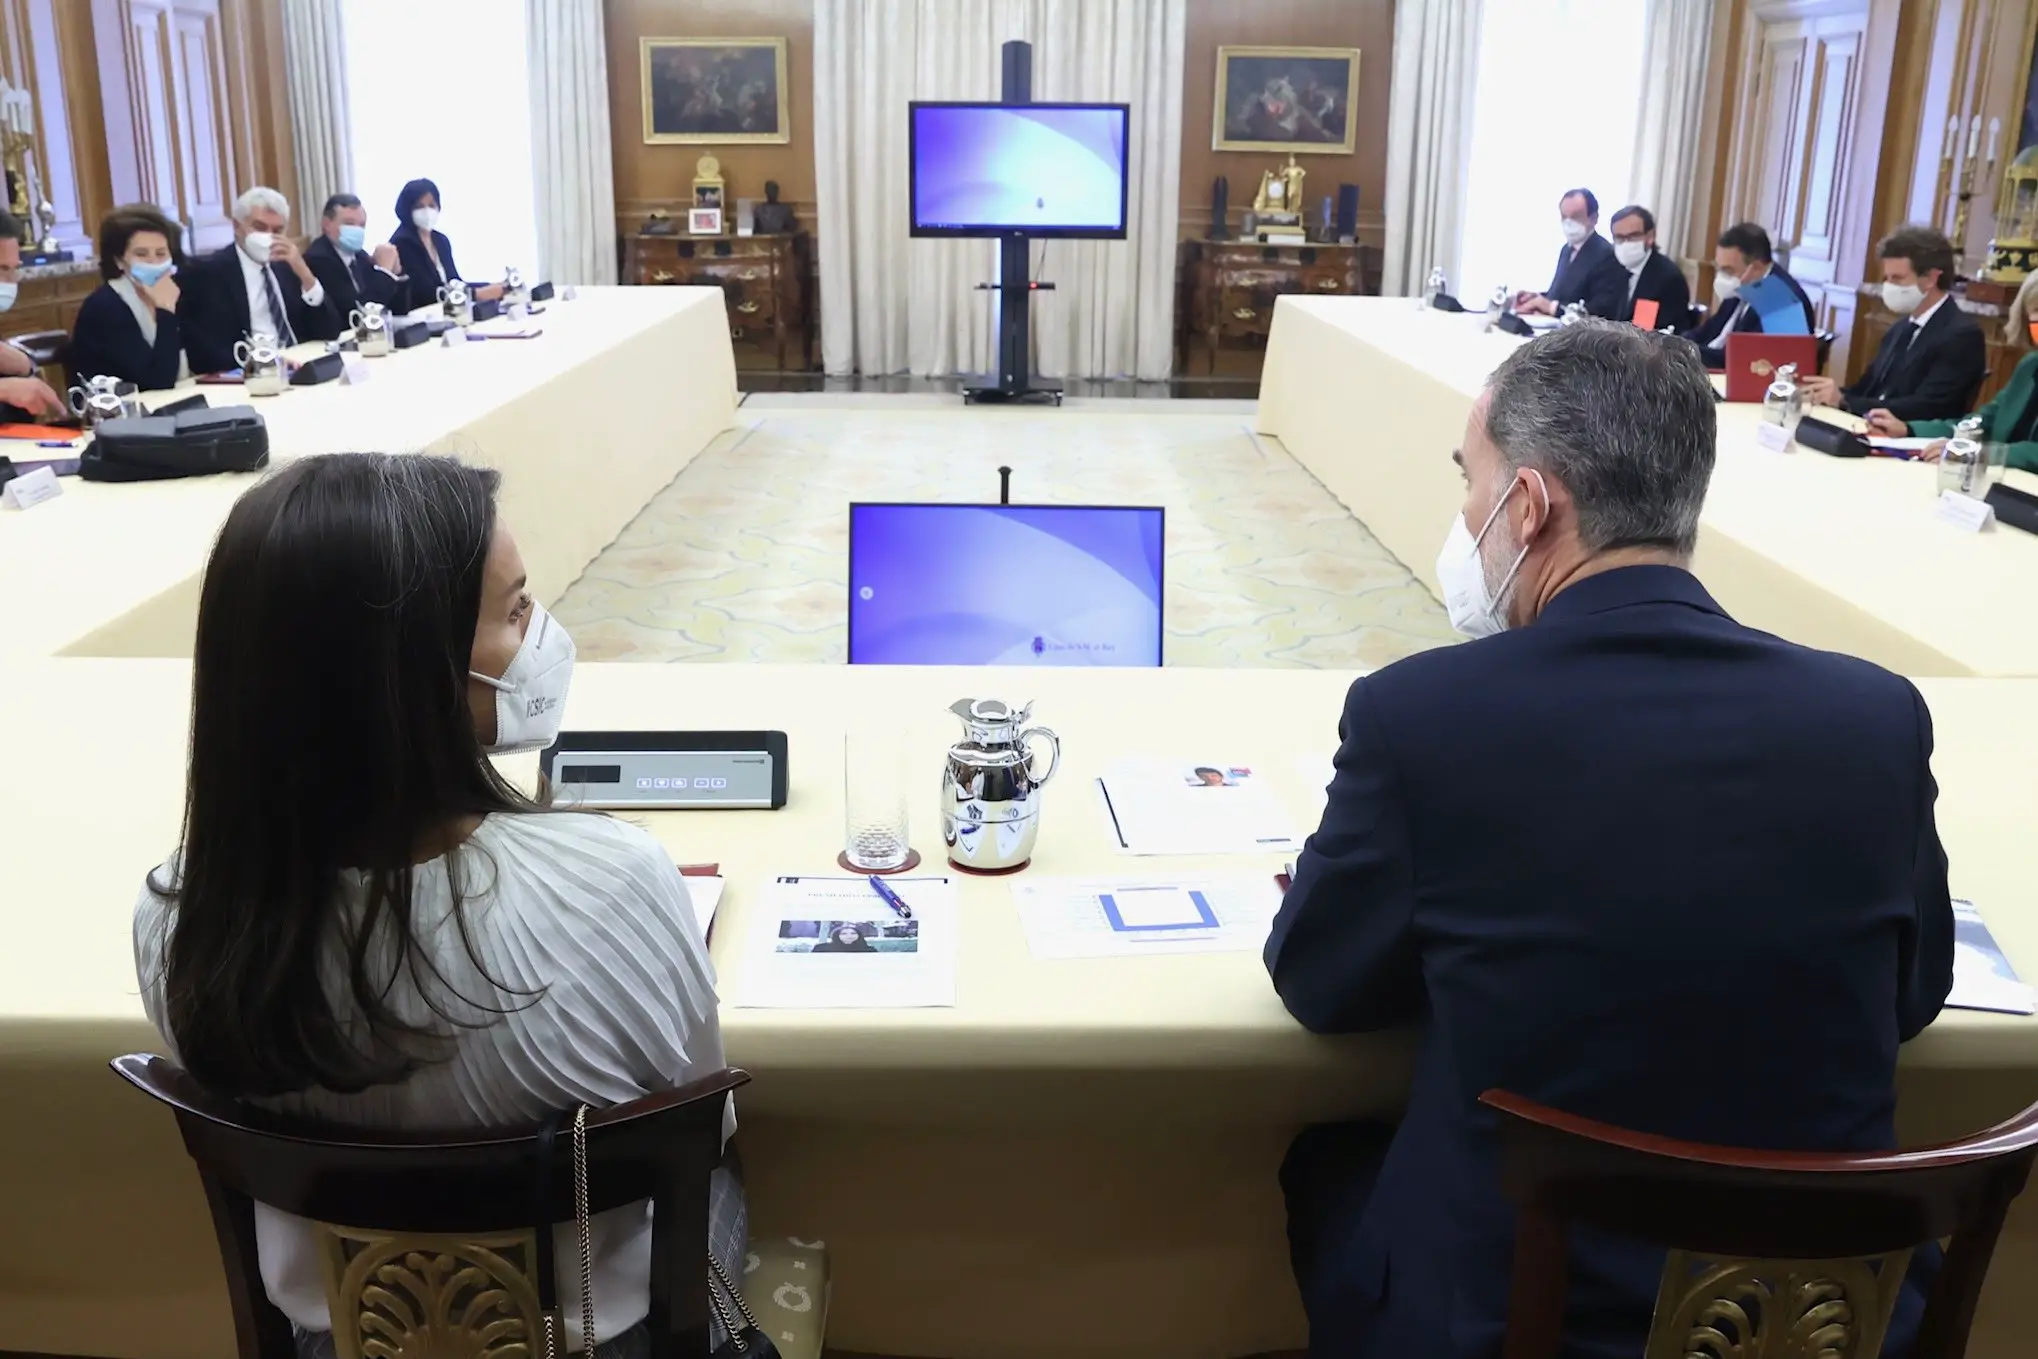 King Felipe and Queen Letizia of Spain attended the twenty-eighth meeting of the Delegate Commission of the Princess of Girona Foundation at the Royal Palace of Zarzuela in Madrid